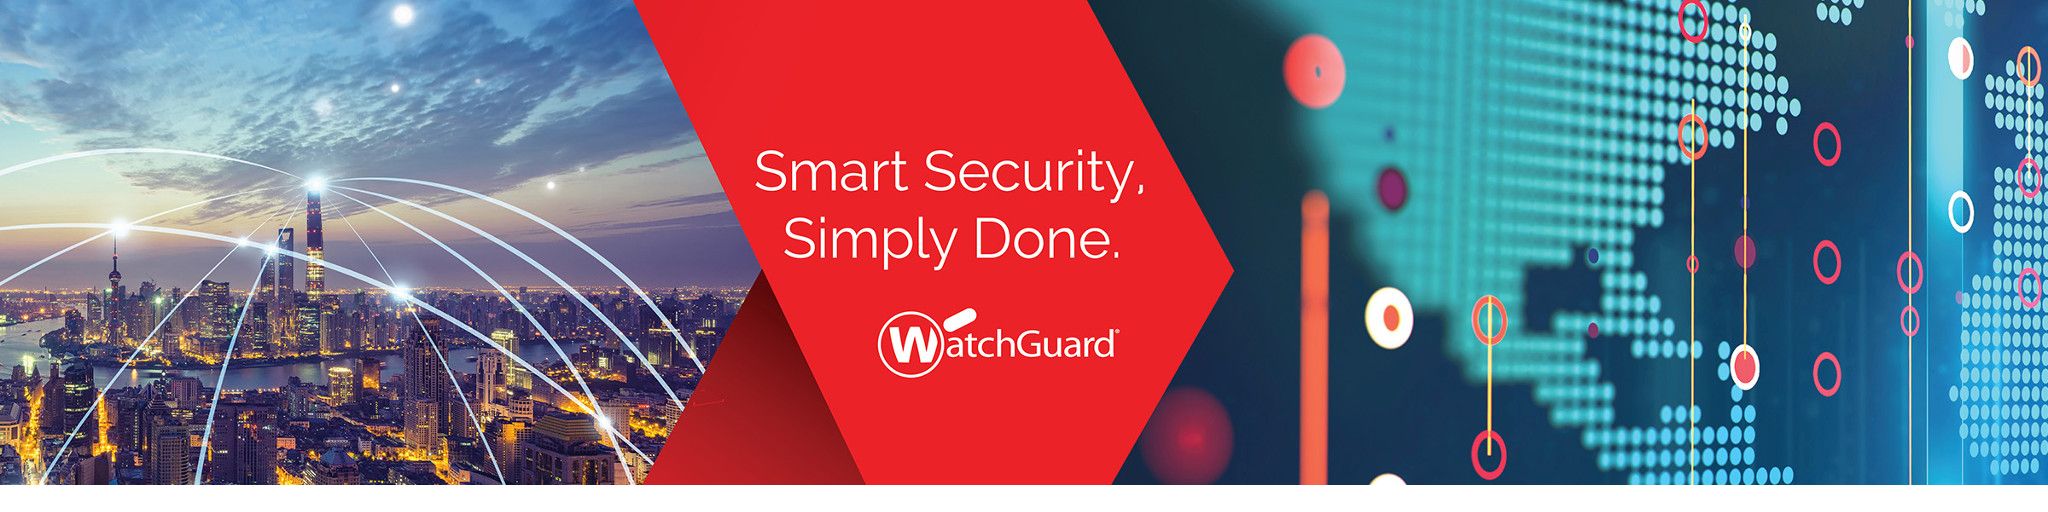 Smart Security, Simply Done